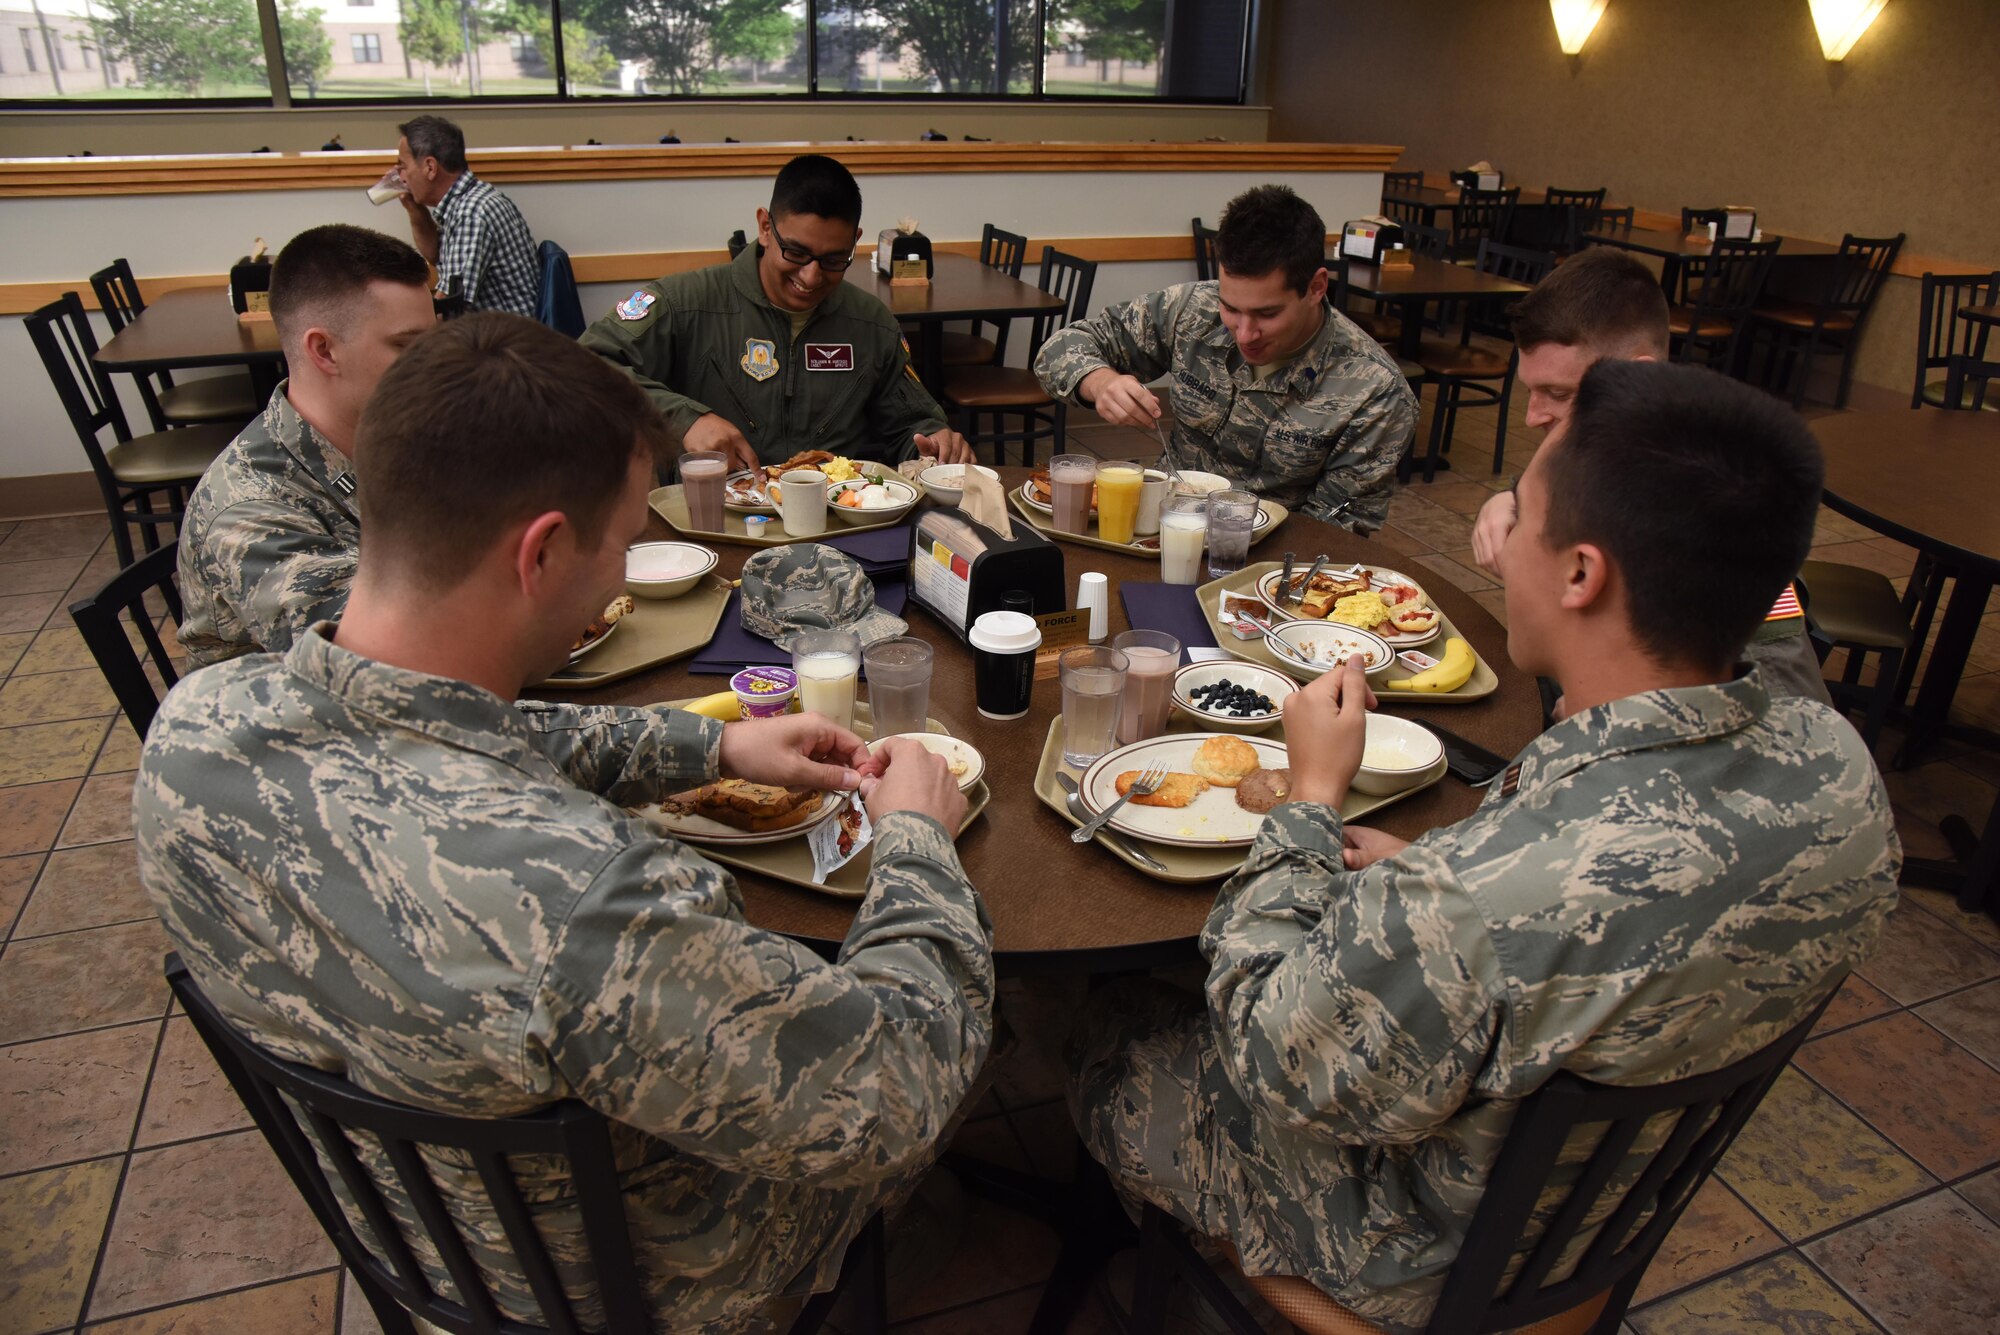 Air Force ROTC cadets eat breakfast in the Azalea Dining Facility during Pathways to Blue April 7, 2017, on Keesler Air Force Base, Miss. Pathways to Blue, an annual event hosted by 2nd Air Force with the support of the 81st Training Wing and the 403rd Wing, allowed cadets to receive hands-on briefings with technical and flying operations and an orientation flight in support of the Air Force's Diversity Strategic Roadmap program. (U.S. Air Force photo by Kemberly Groue)